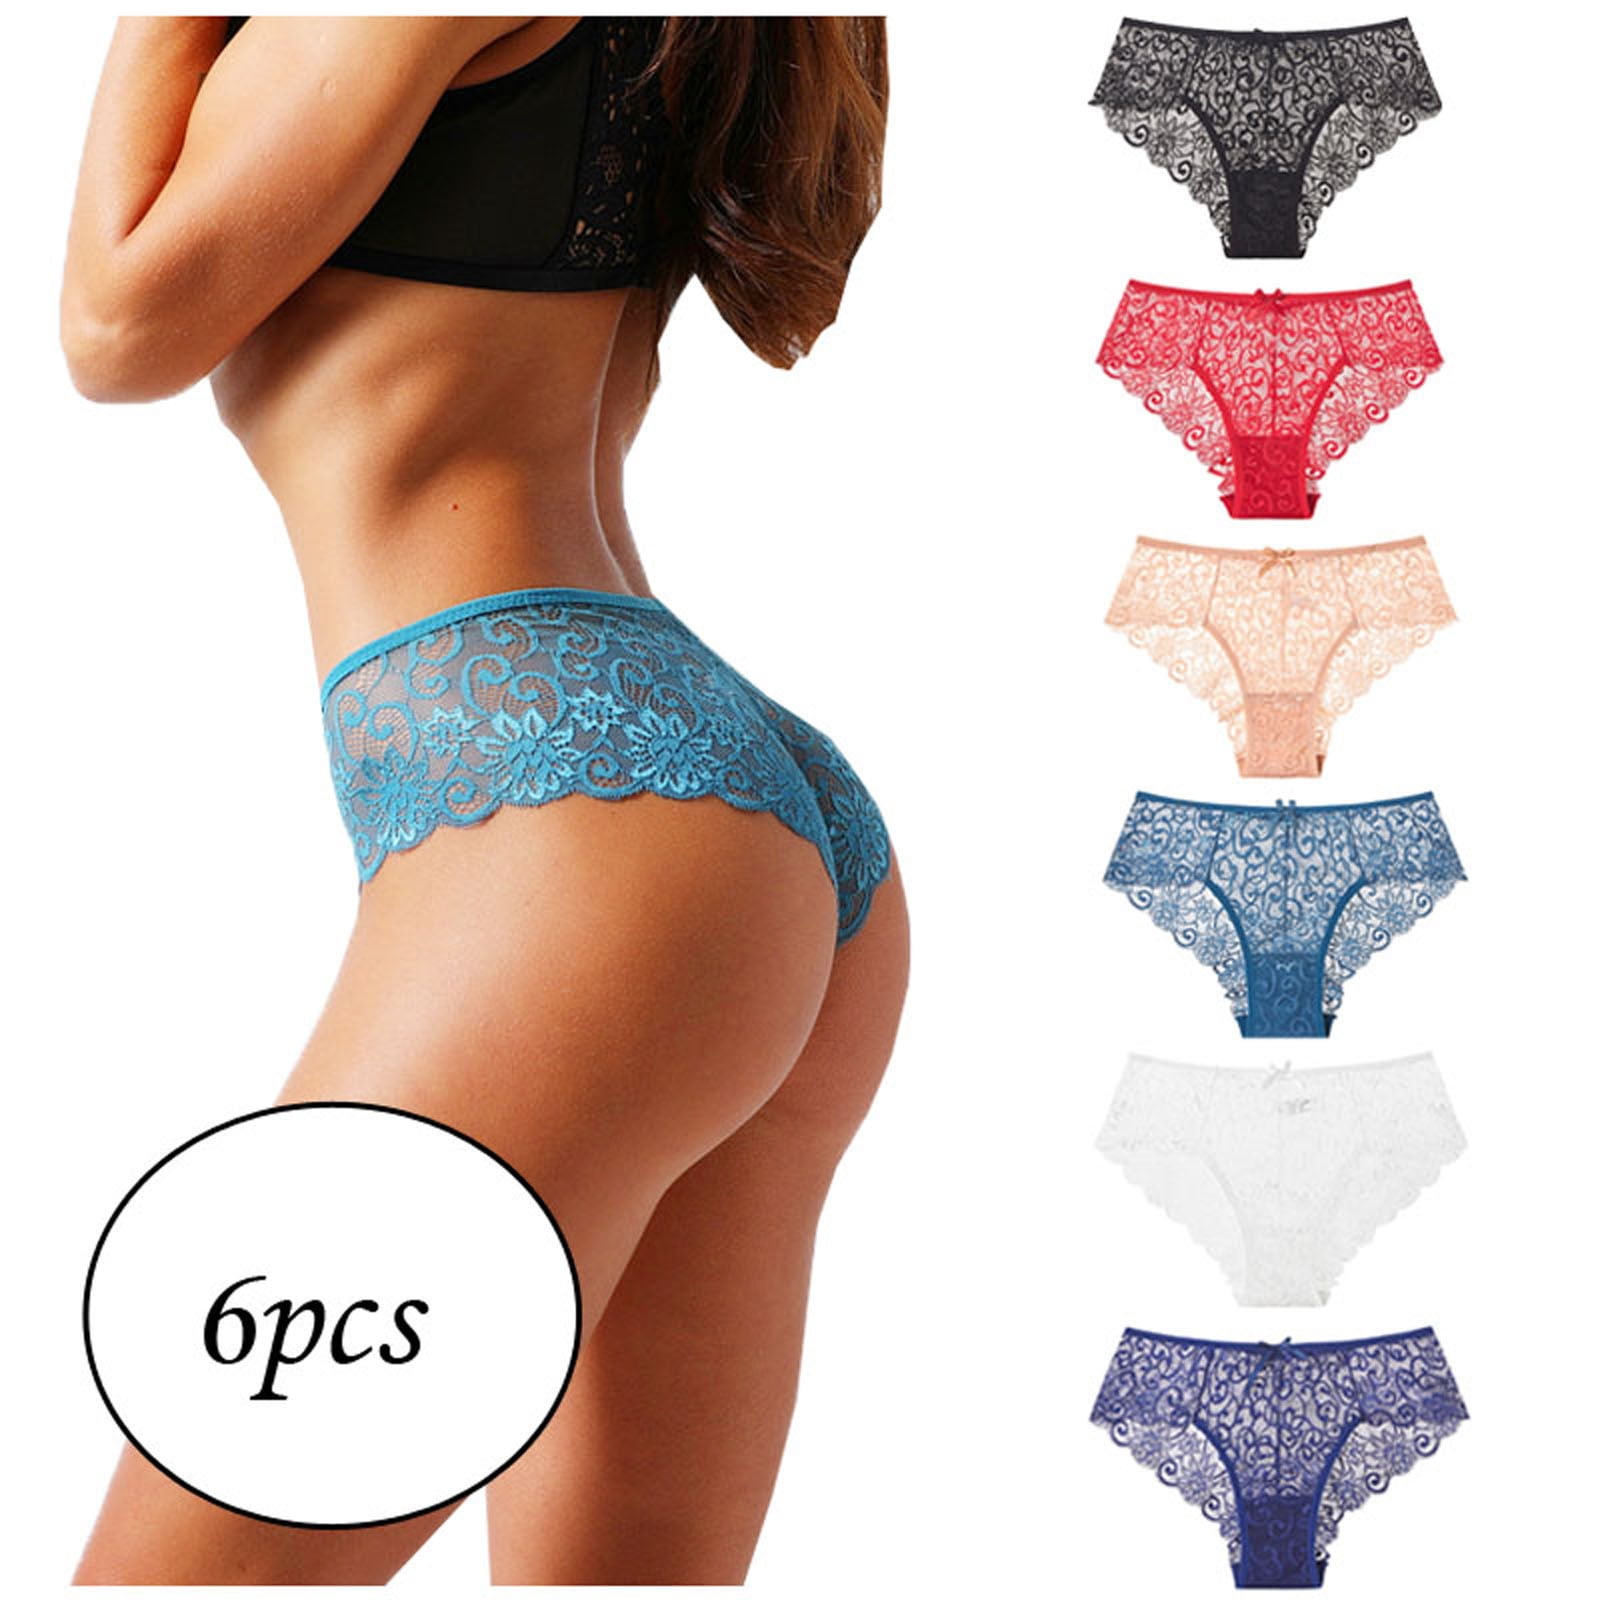 Kayannuo Lingerie For Women Clearance Sexy 6PC Women Lace Flowers Low Waist Underwear  Panties G-string Lingerie Thongs 